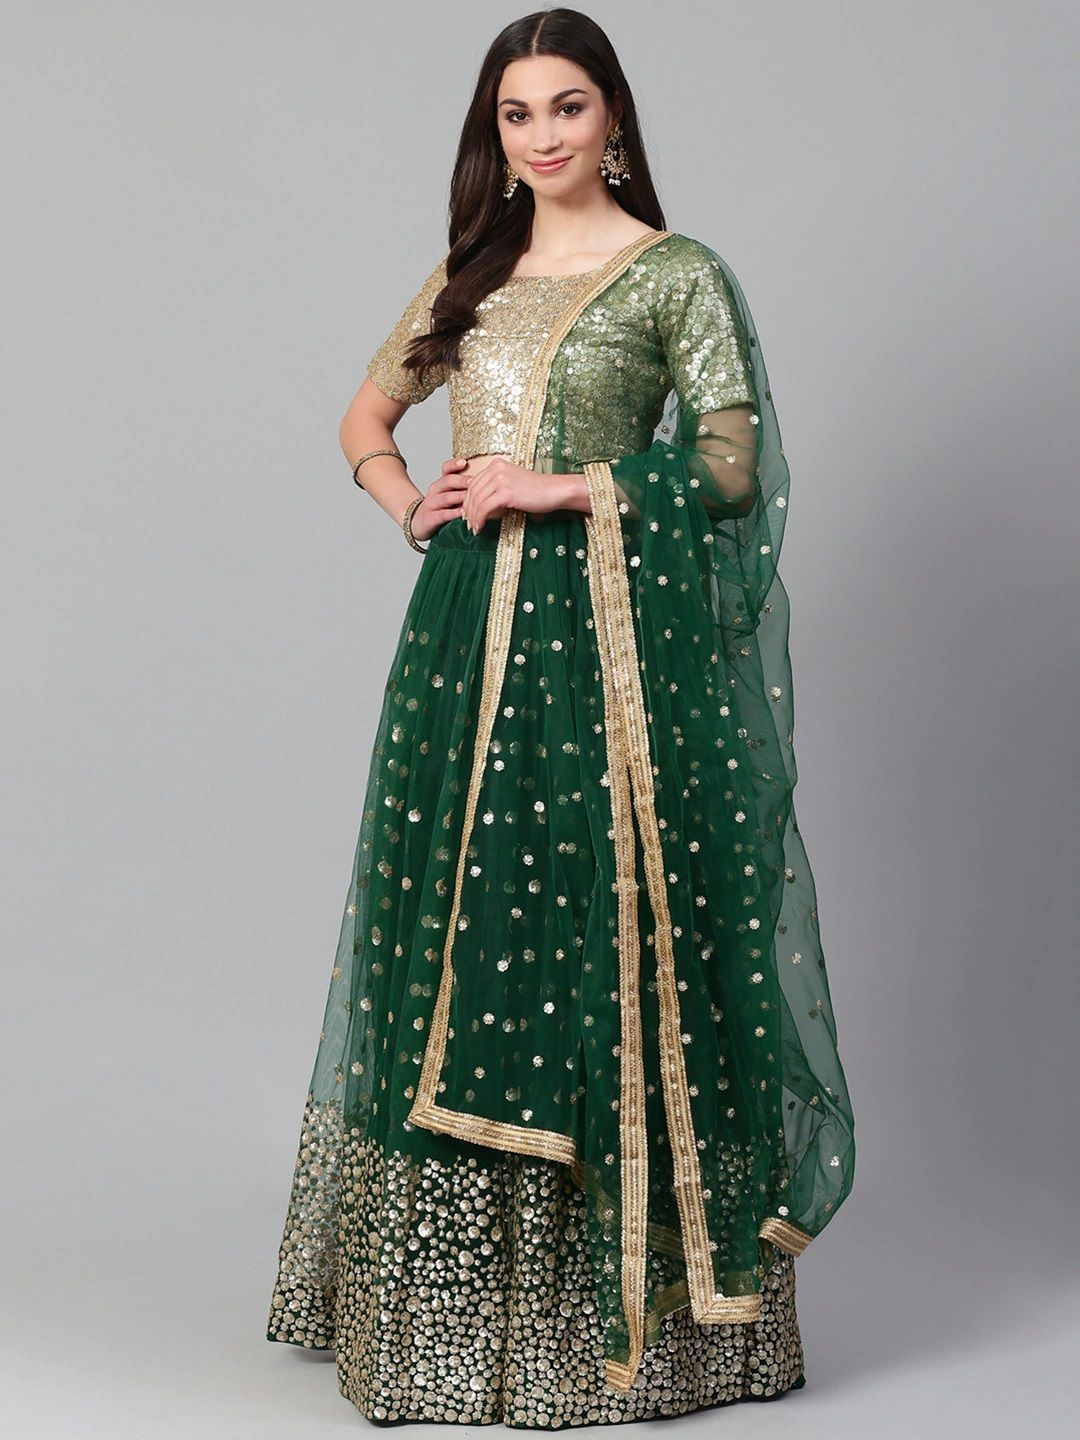 Green & Golden Semi-Stitched Myntra Lehenga & Unstitched Blouse with Dupatta